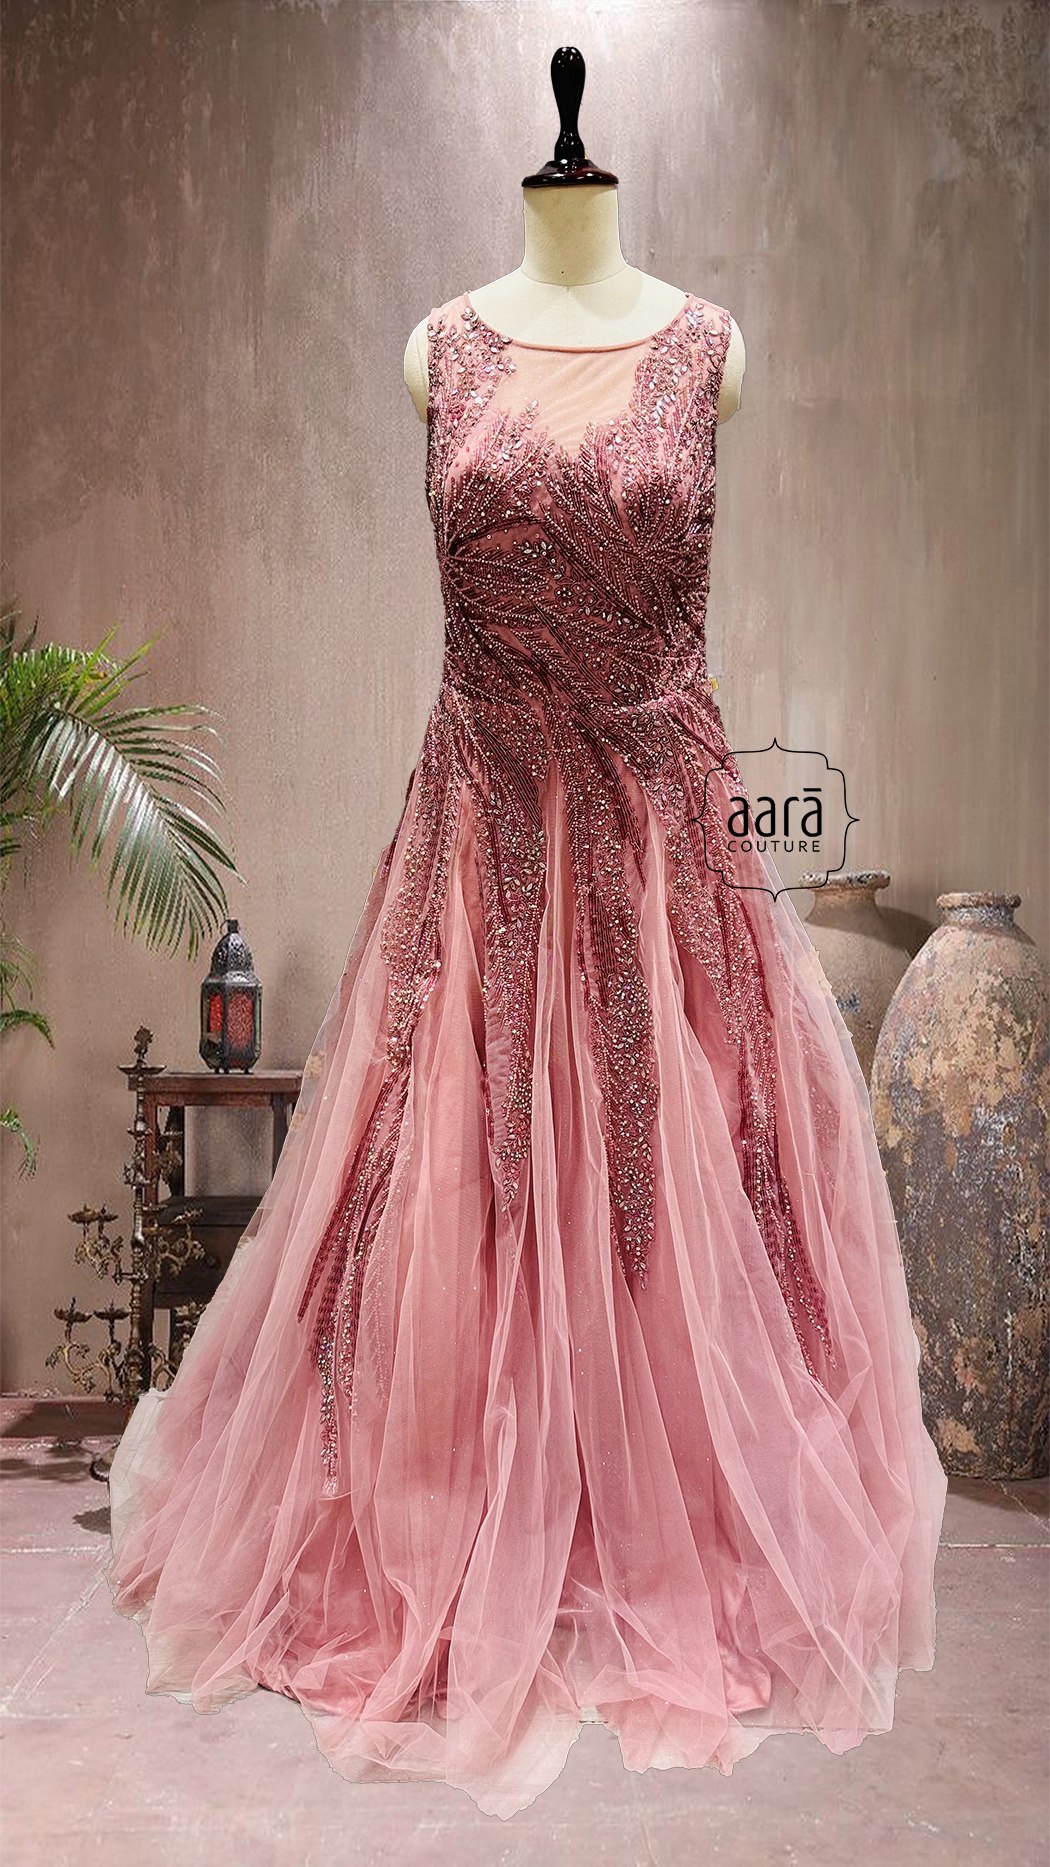 Shop Designer Party Wear Gowns from Asopalav